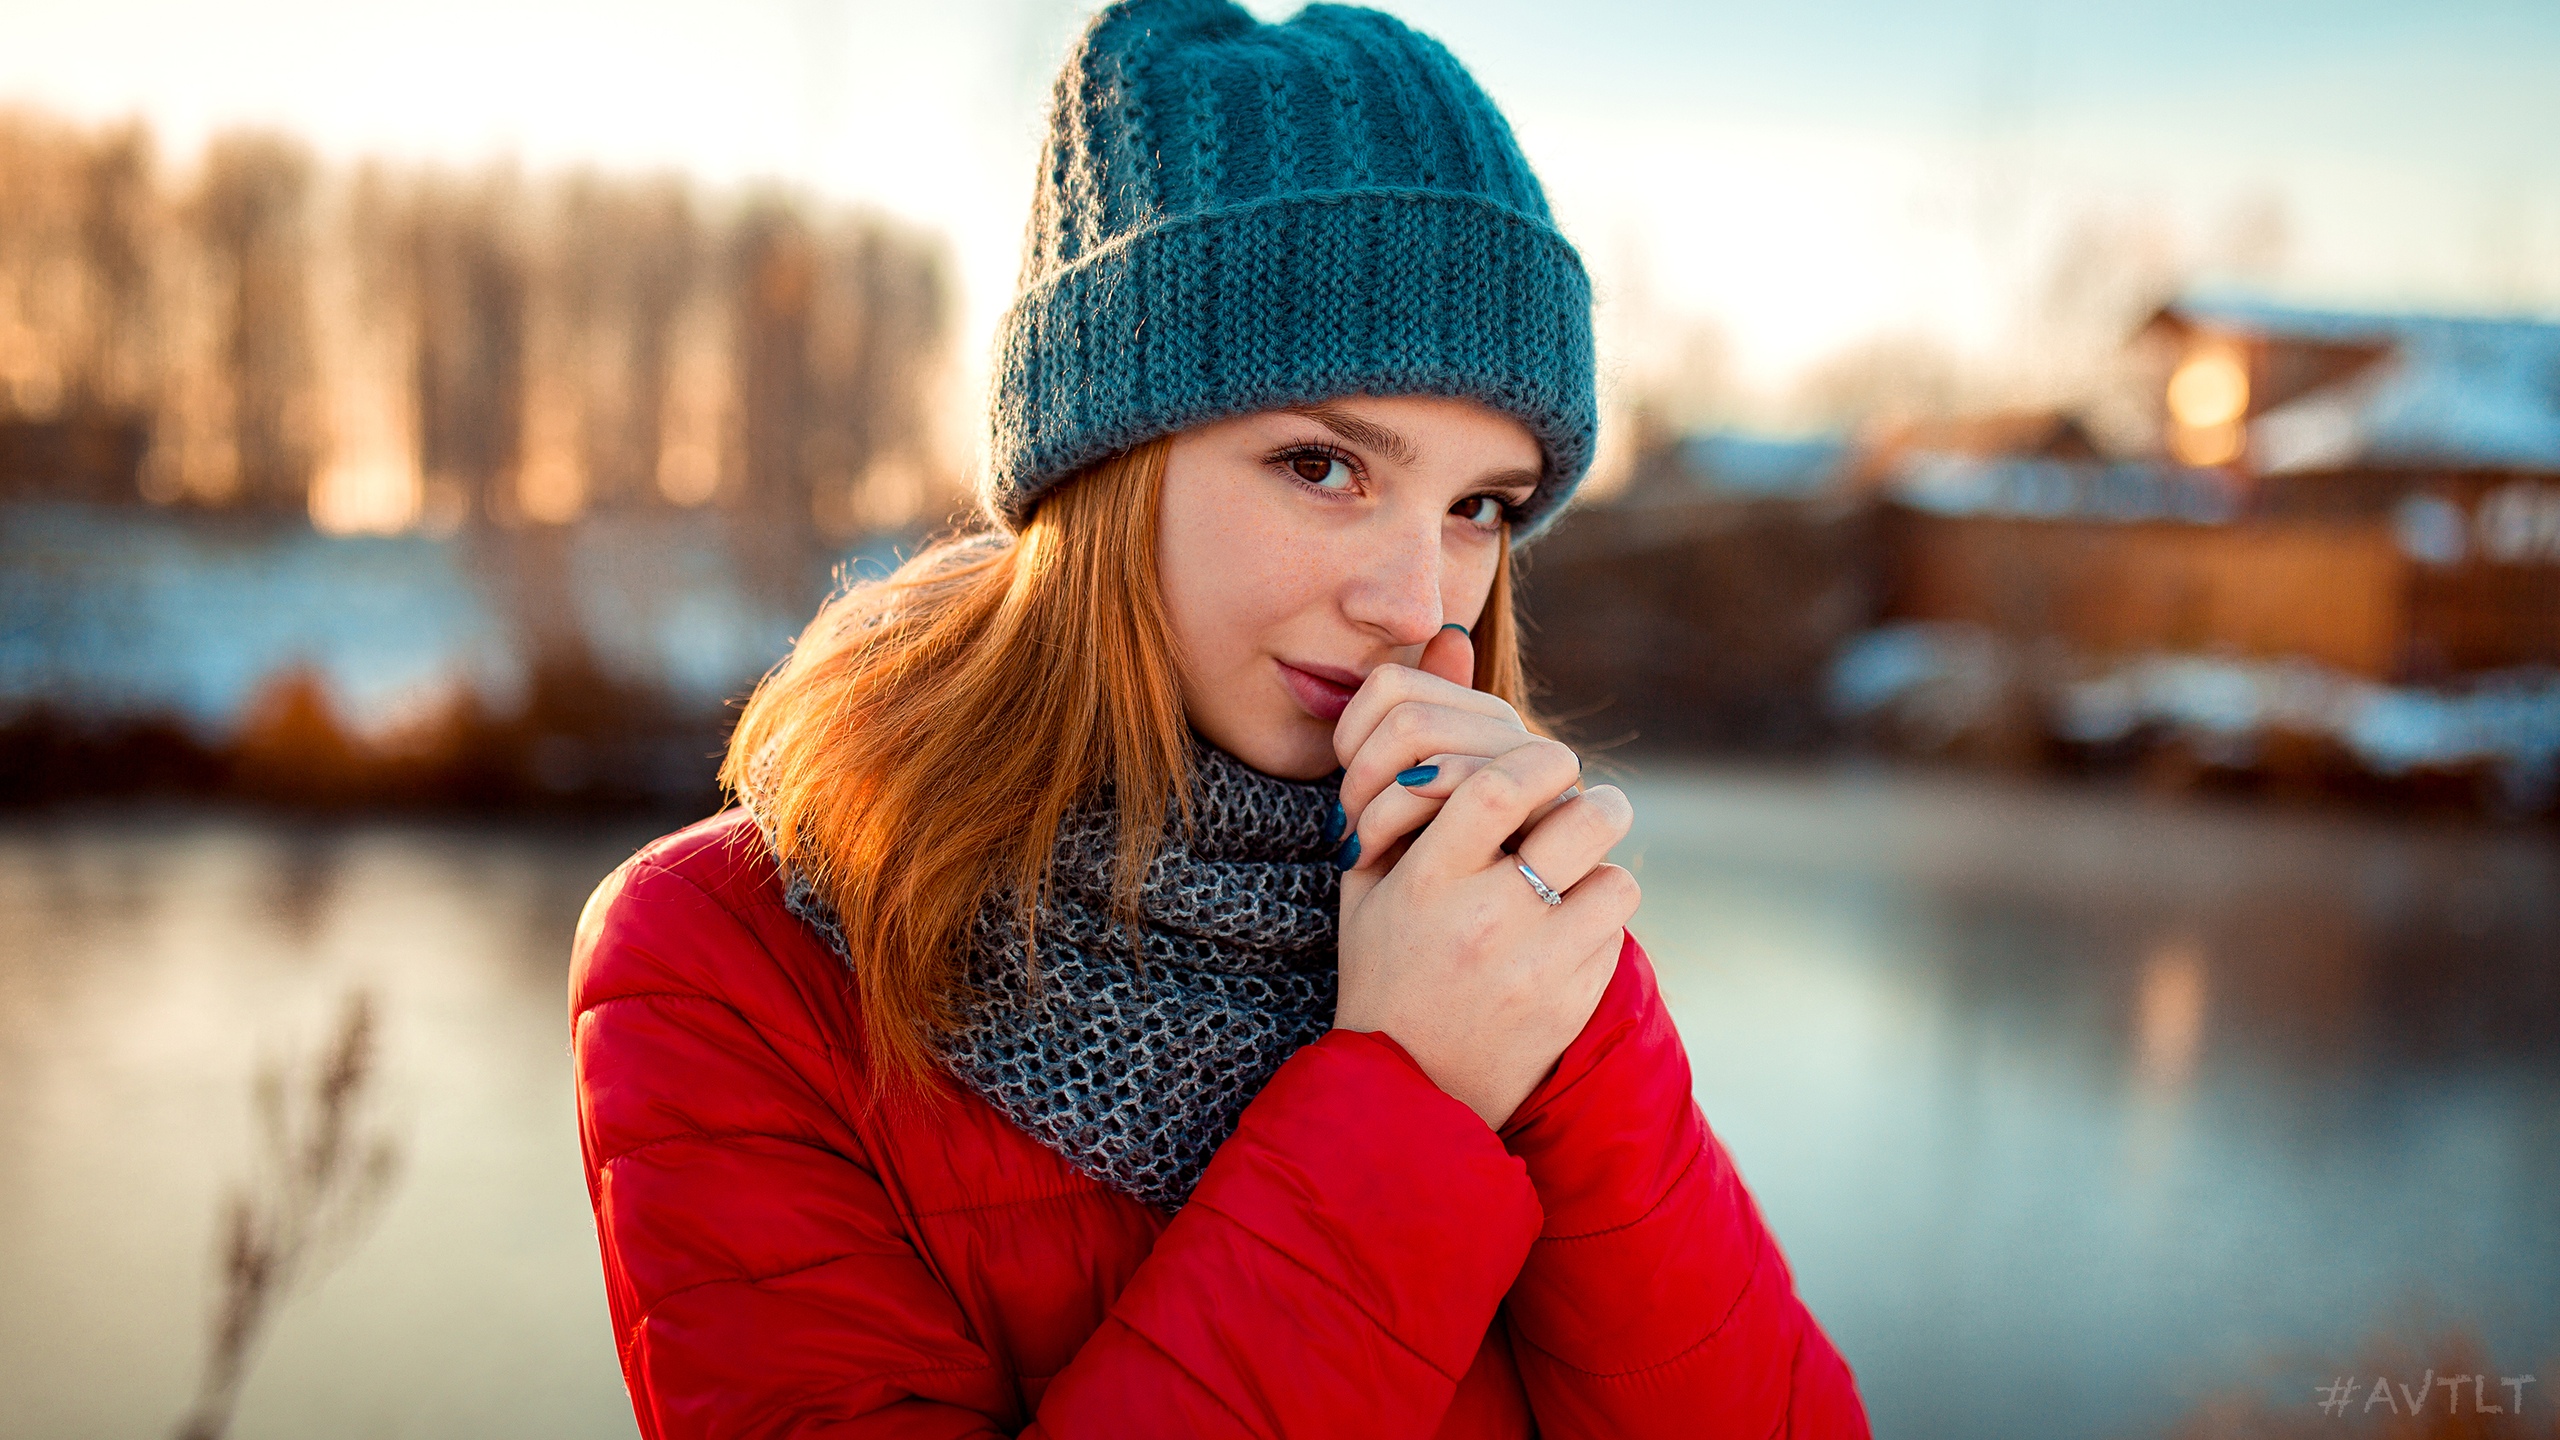 Women Model Portrait Looking At Viewer Depth Of Field Woolly Hat Scarf Jacket Red Jackets Redhead Br 2560x1440